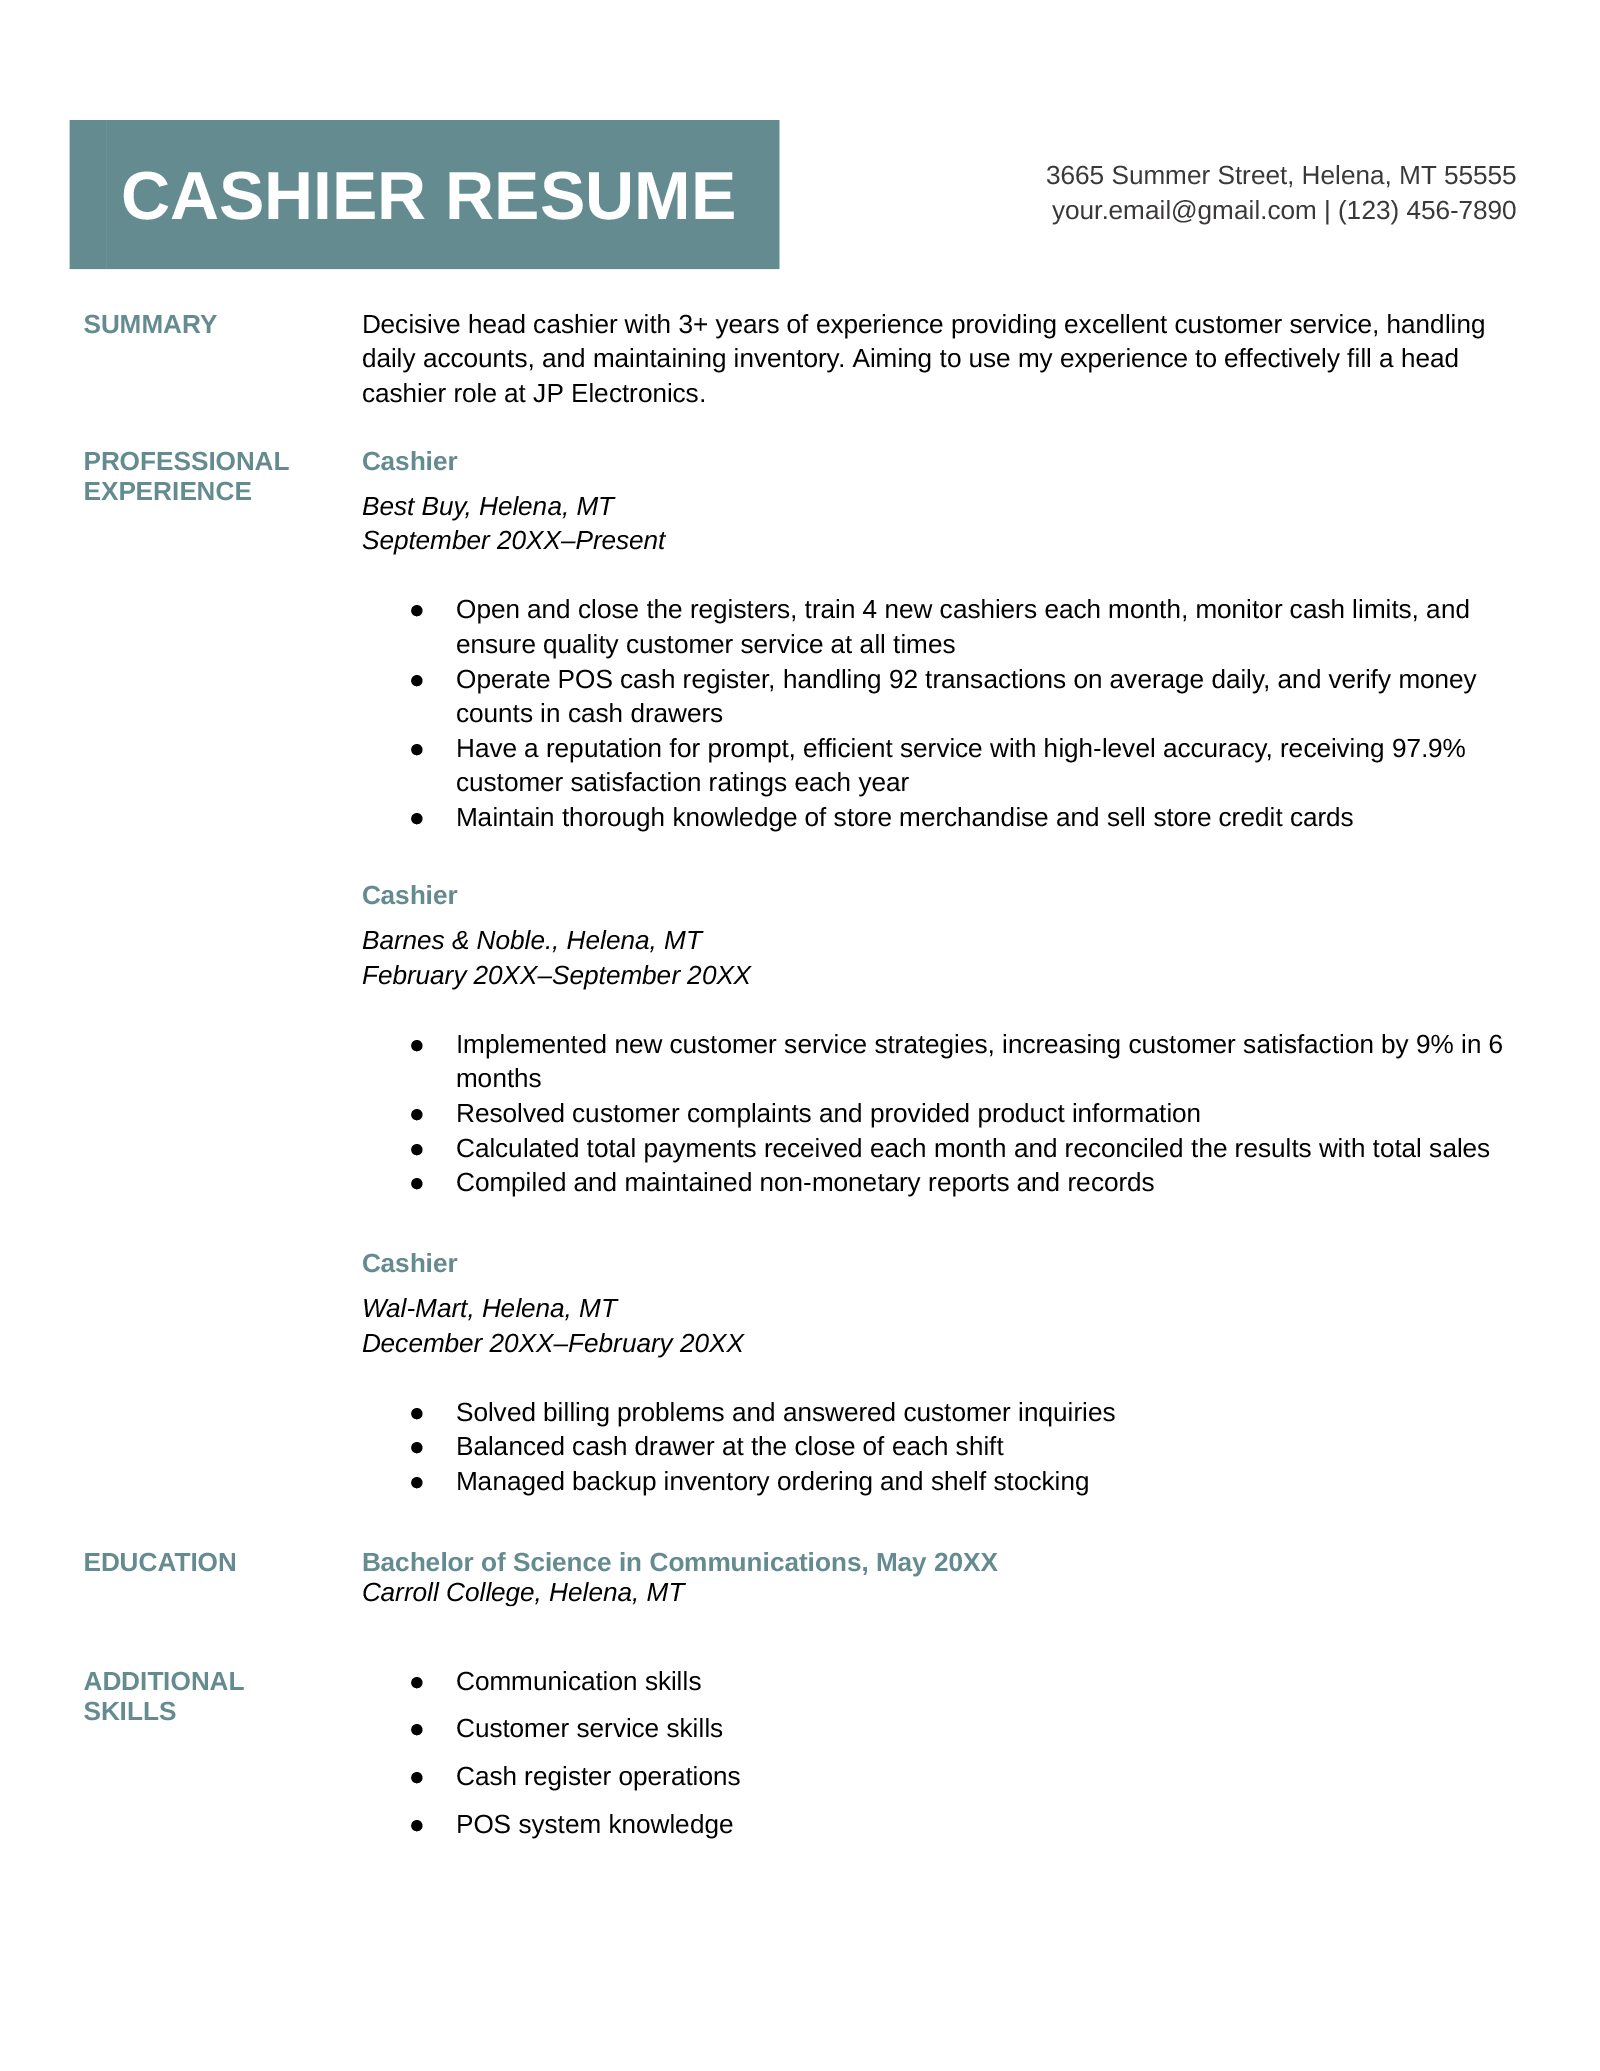 A cashier resume example.